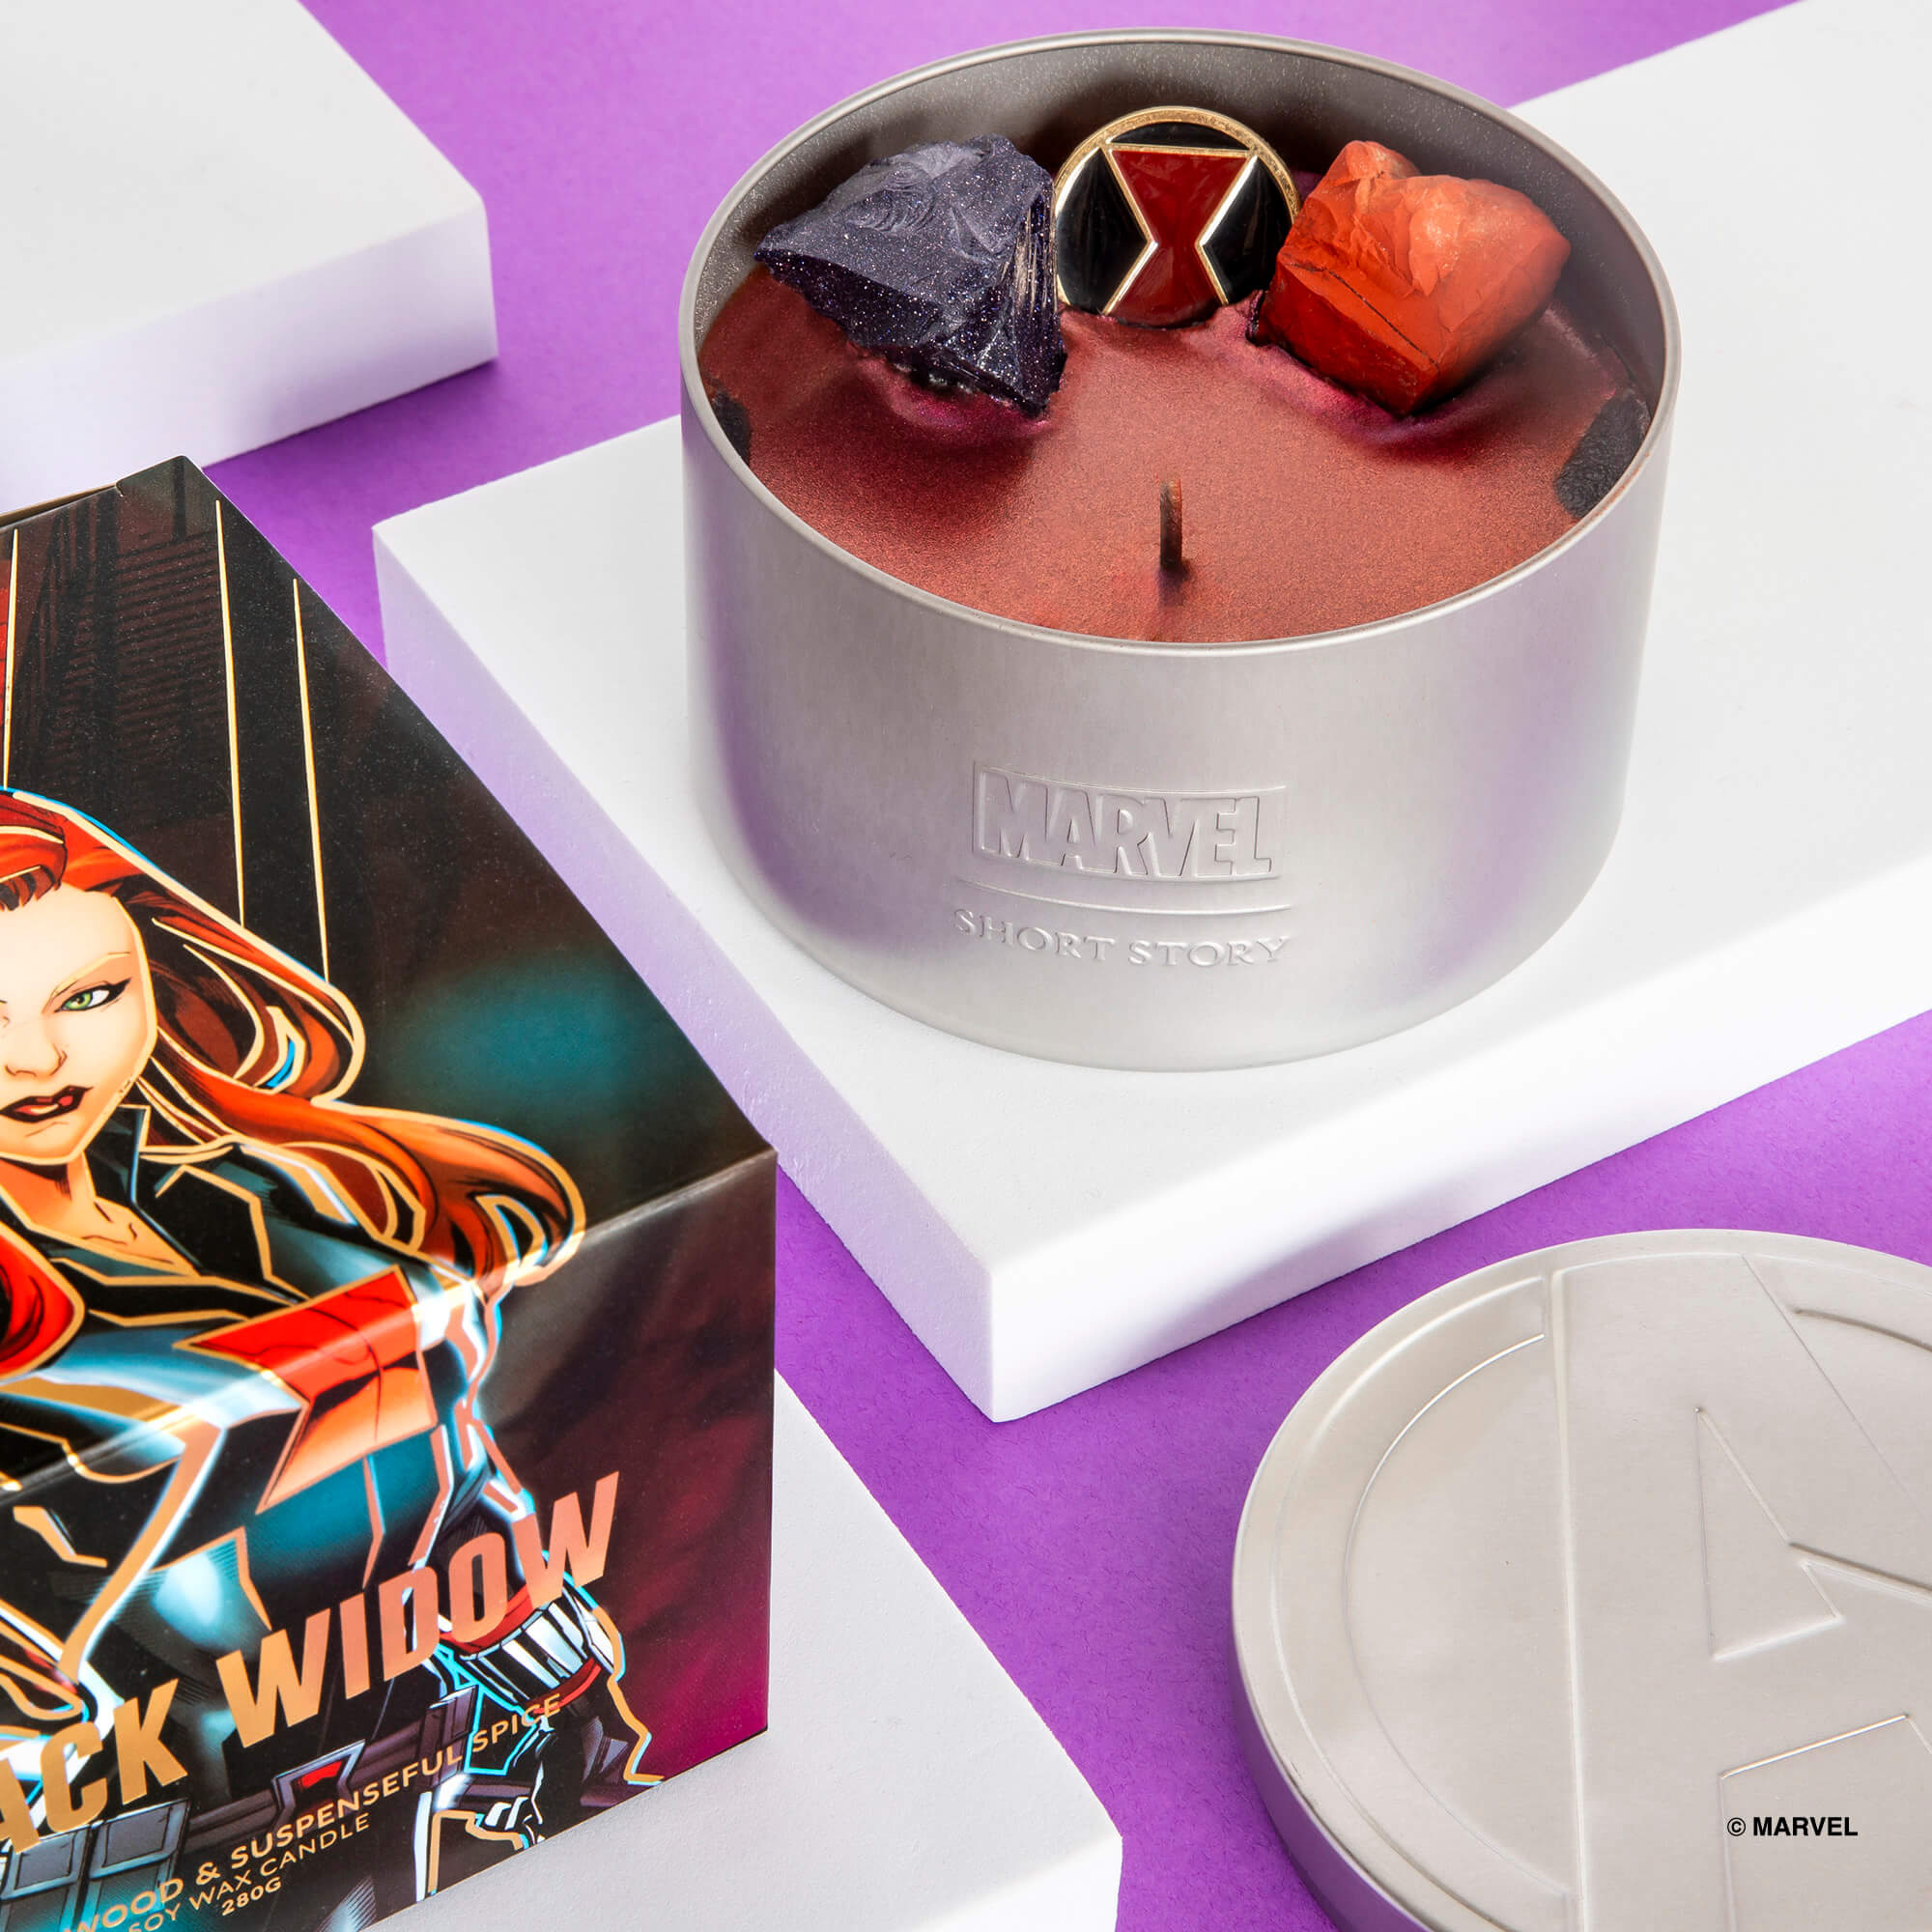 Marvel Candle Black Widow